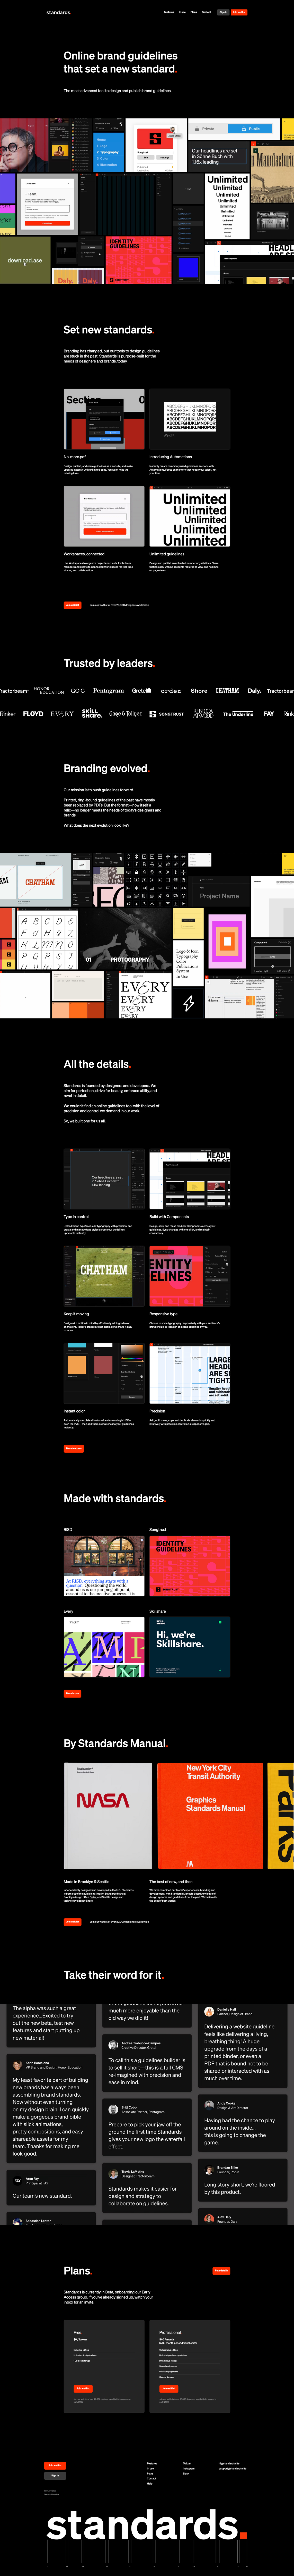 Standards Landing Page Example: Standards, the most advanced and precise tool for designers to create and publish online brand guidelines.